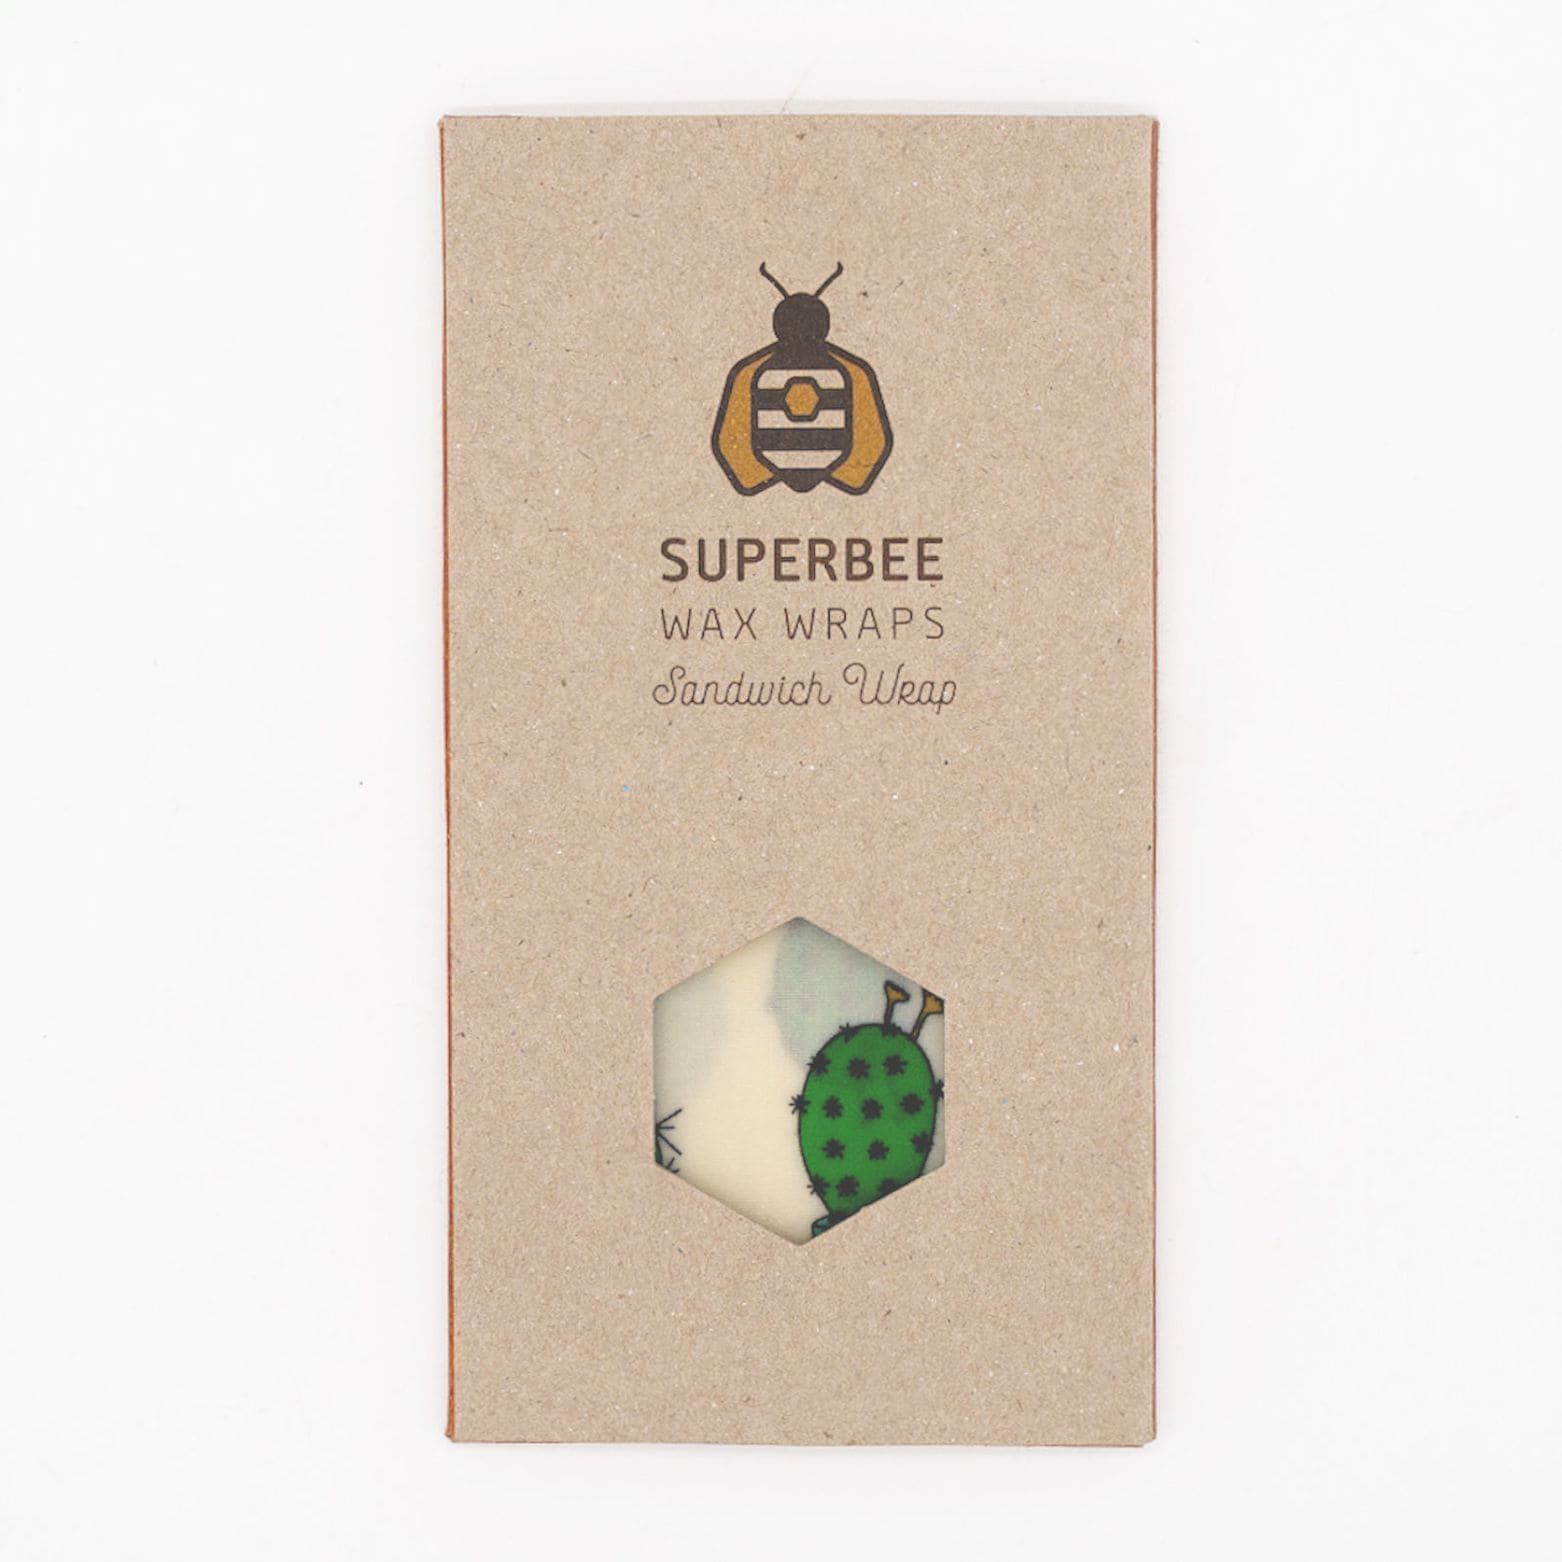 Superbee, Made in Thailand, sustainable wraps, plastic free, sustainable kitchen wraps, reusable wrapping, recycable, sustainable living, eco friendly living, ethical made, home,living, Beeswax wraps,fair working conditions, plastic-free, antibacterial, reusable, sustainable, washable, high quality and certified food safe, zero waste, Nourished